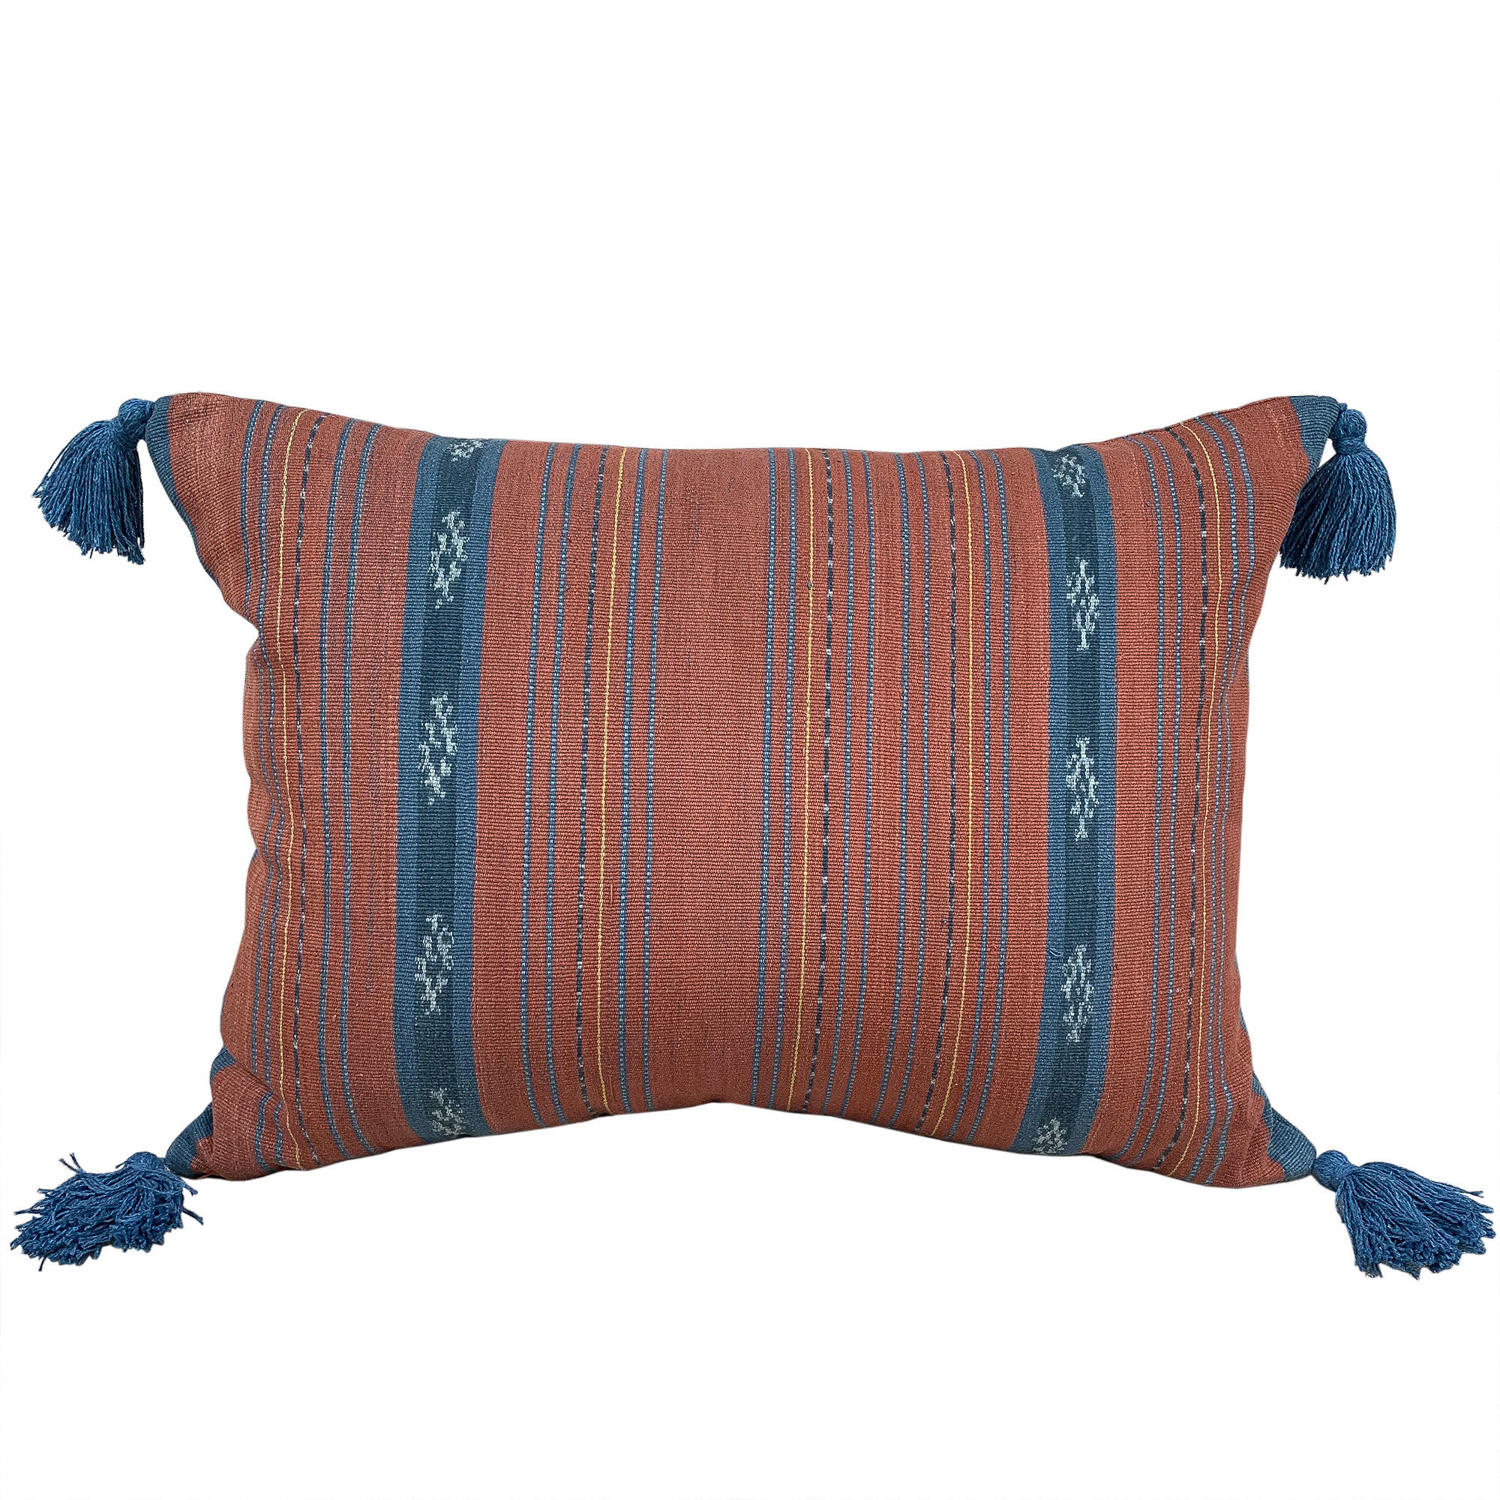 Flores Ikat Cushions with Blue Tassels